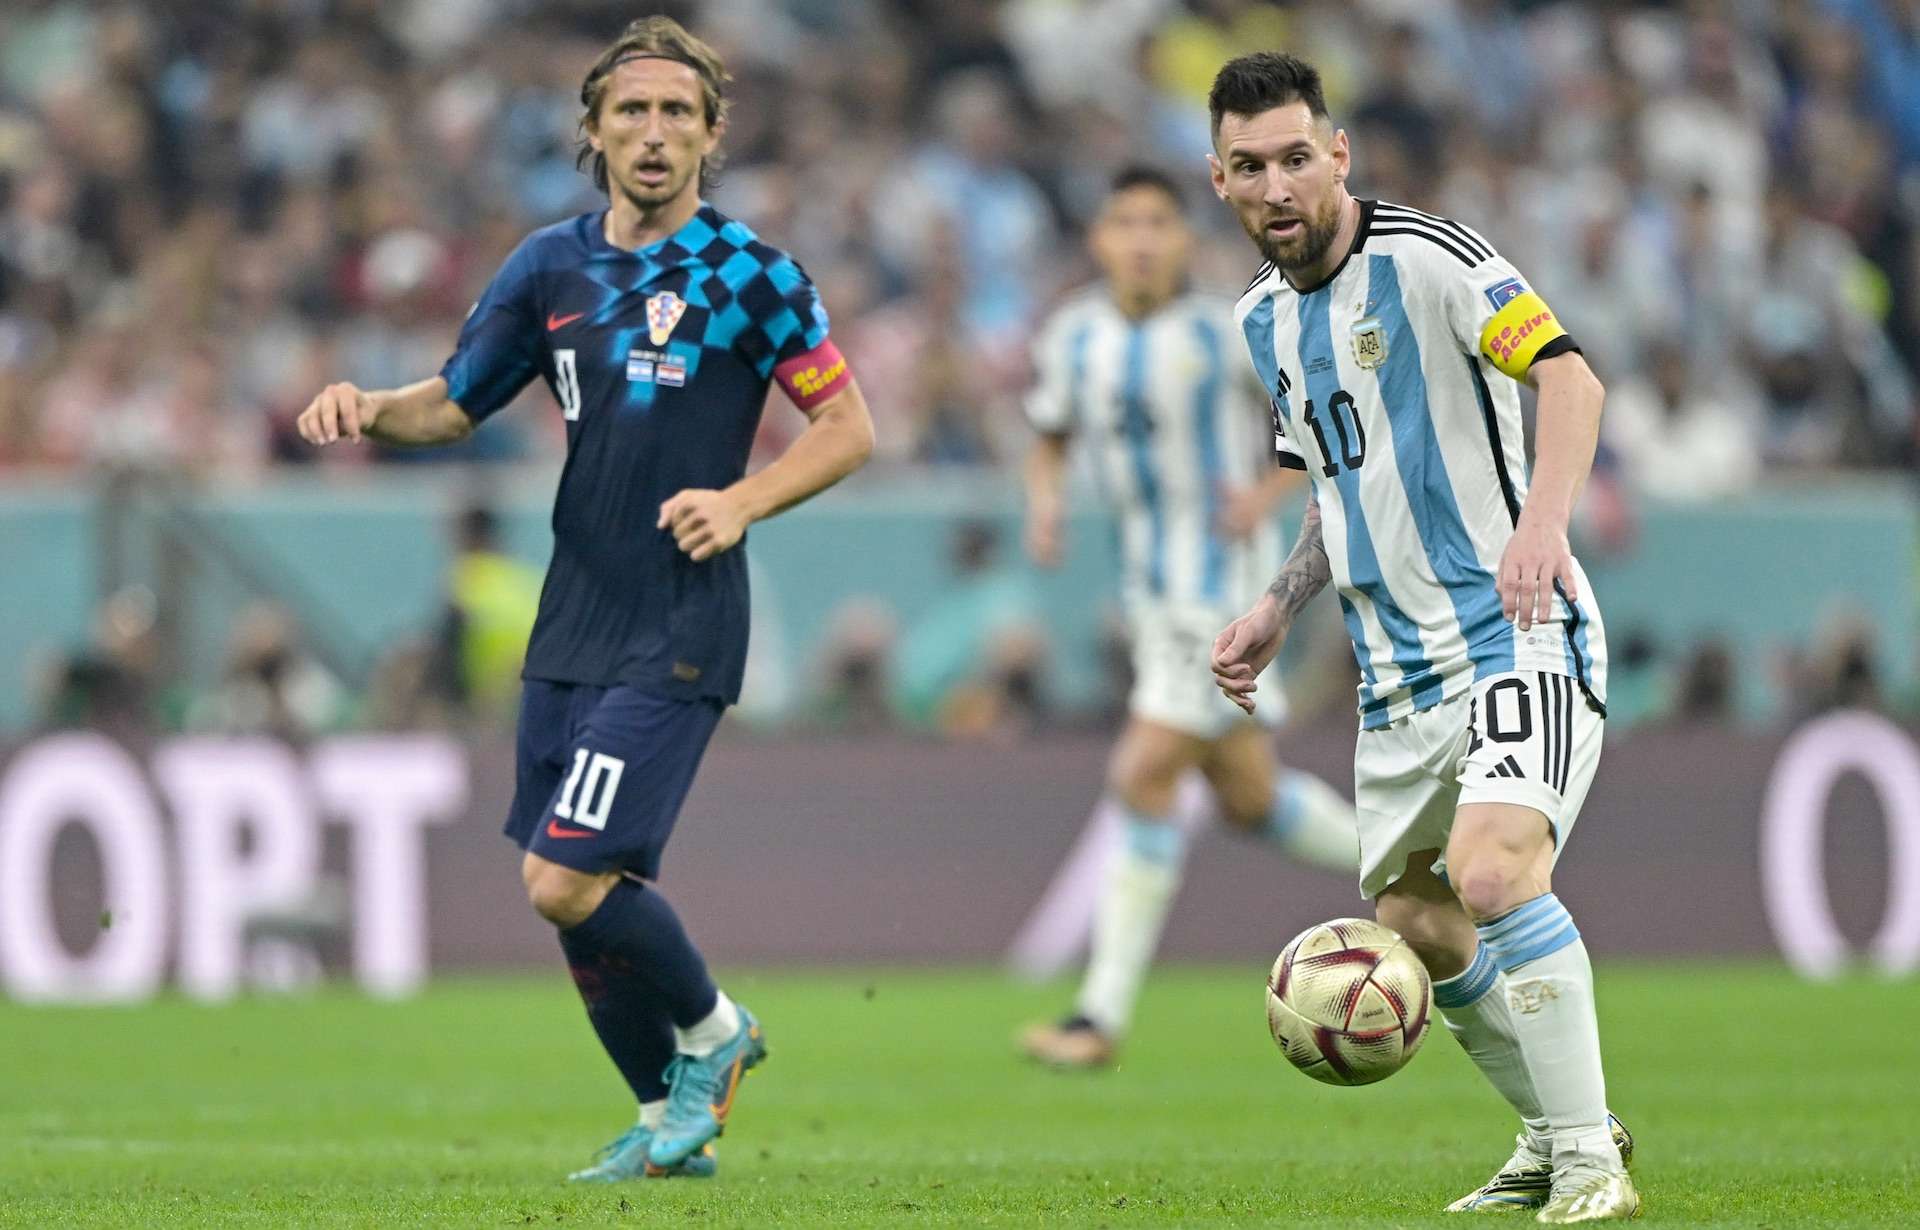 Argentina beat Croatia 3-0 in the FIFA World Cup semi-final thanks to Messi brilliance